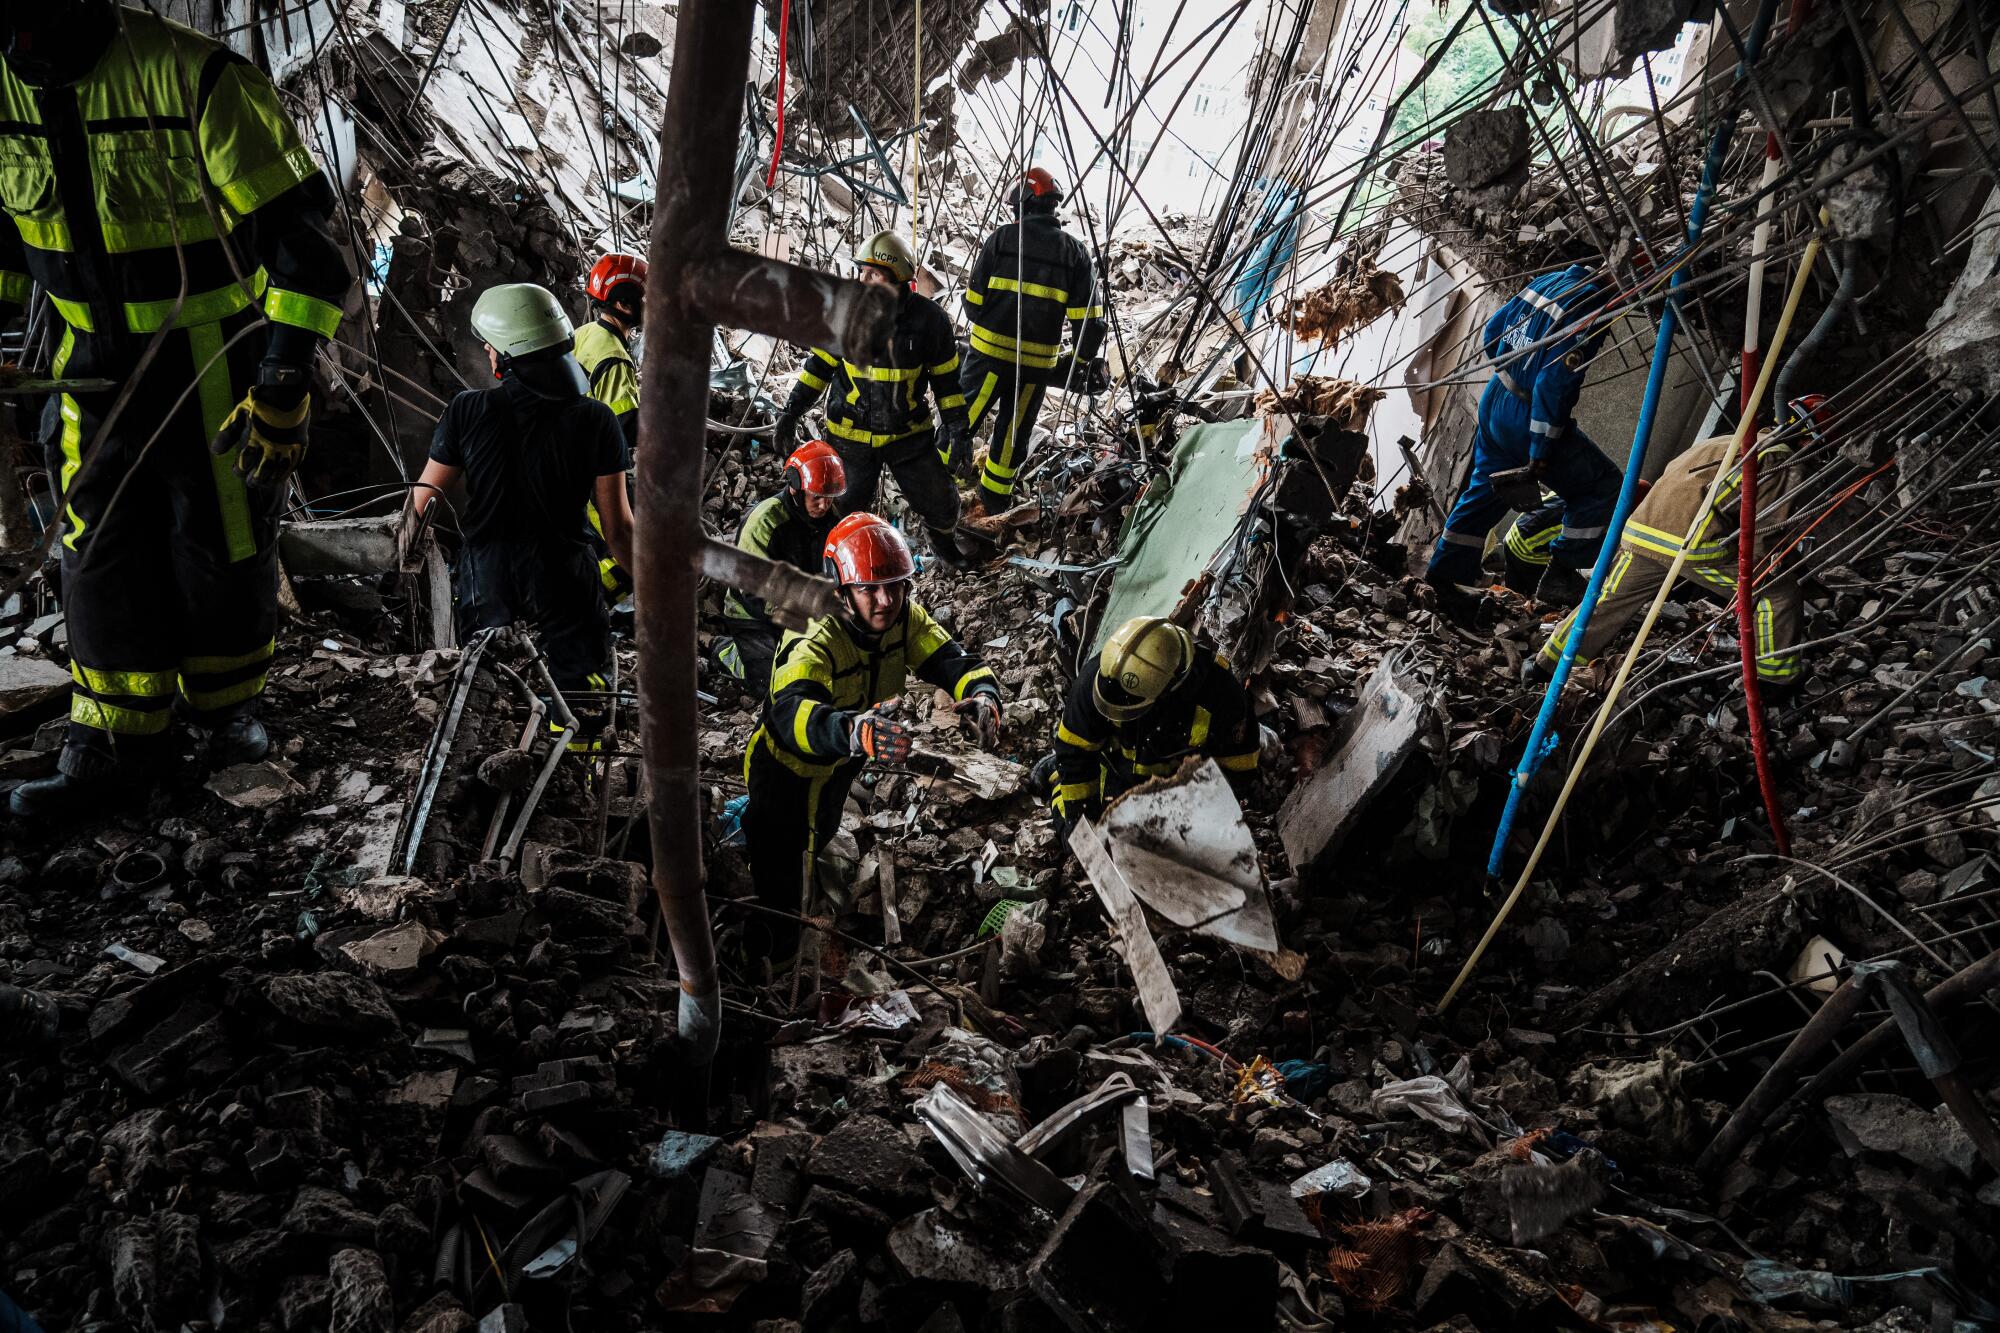 Rescuers search for victims in the rubble of a destroyed building